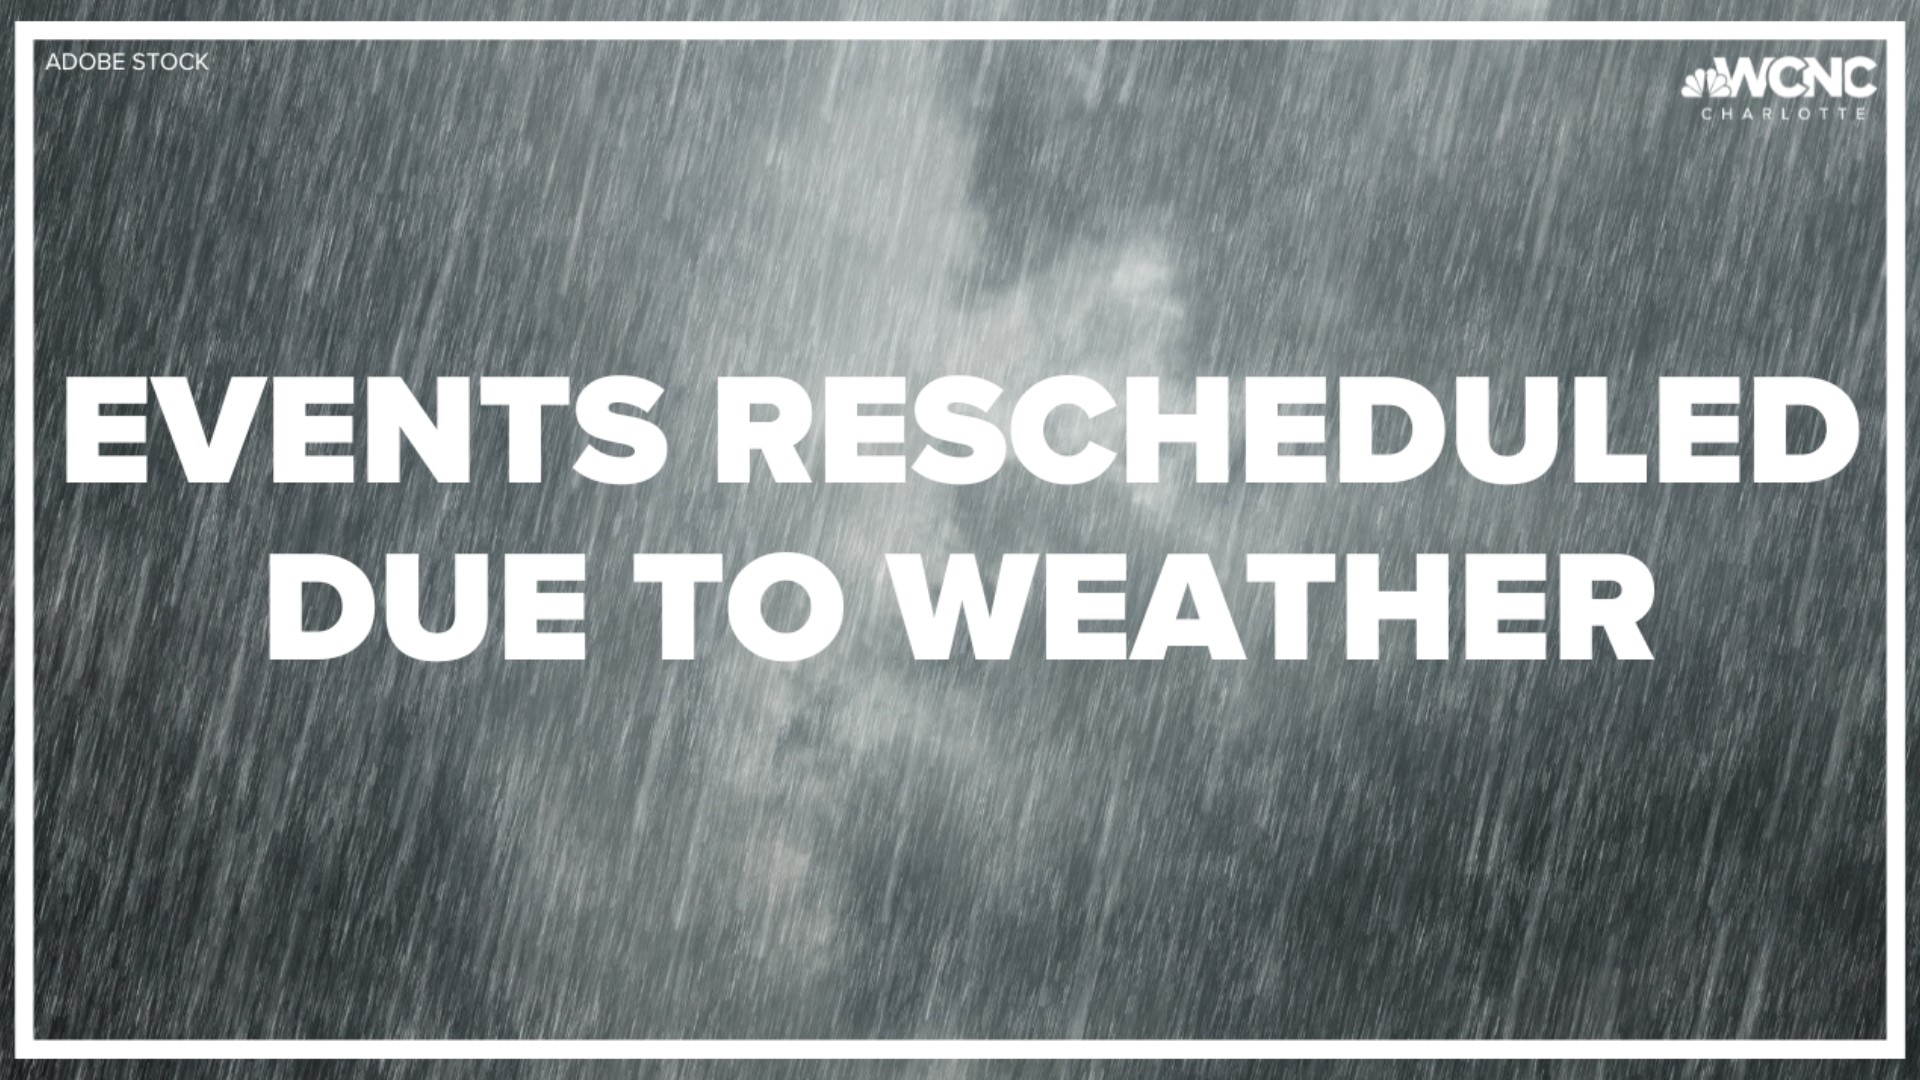 This weekend's weather is not ideal for outdoor activities. So some are getting rescheduled.